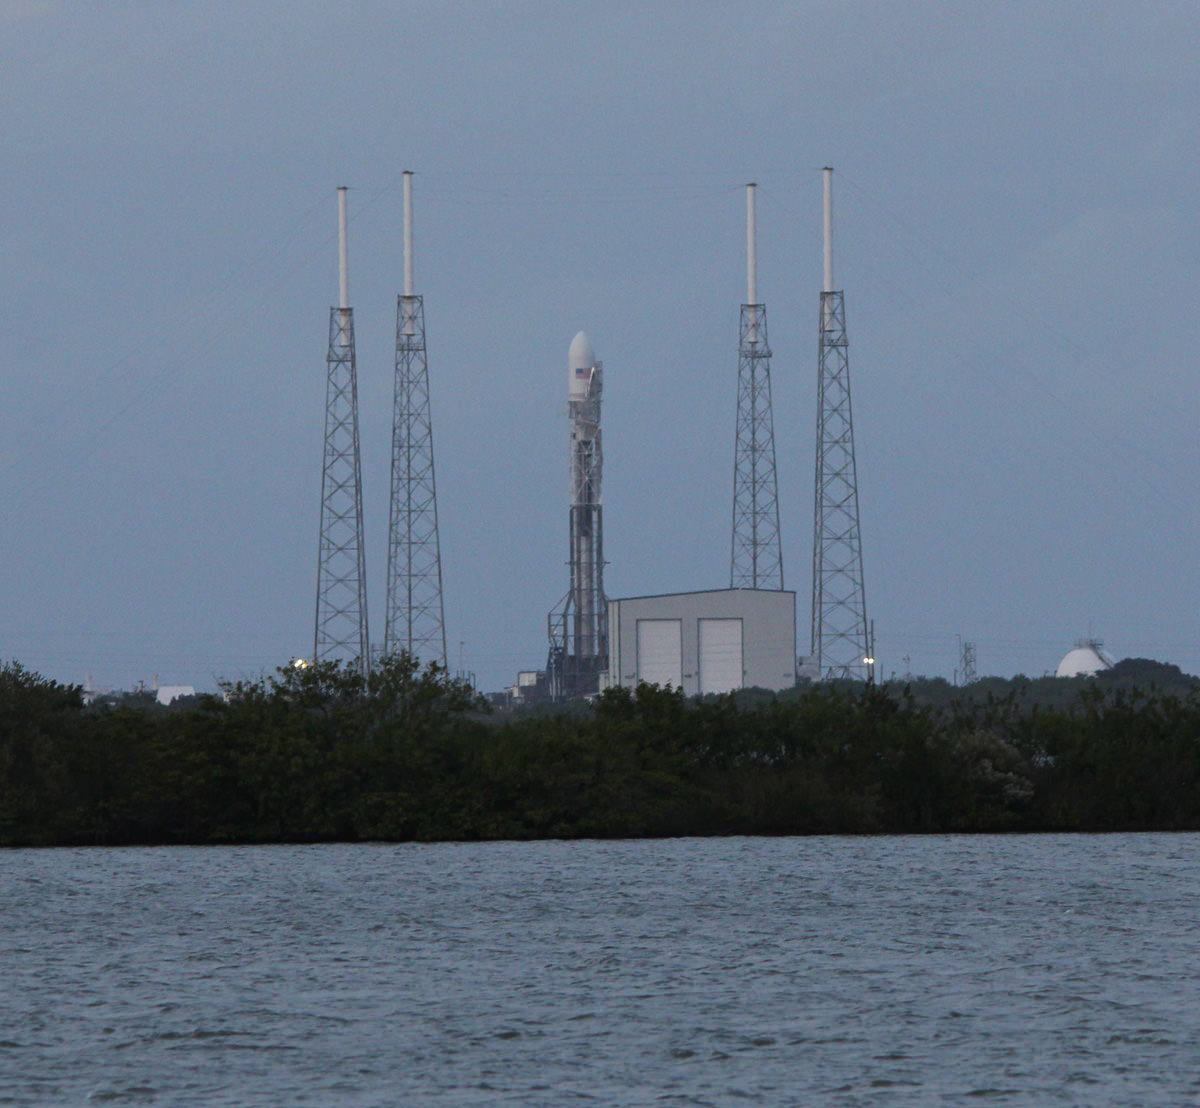 SpaceX Falcon 9 rocket with SES-8 communications satellite awaits launch from Pad 40 at Cape Canaveral, FL, file photo. Credit: Ken Kremer/kenkremer.com